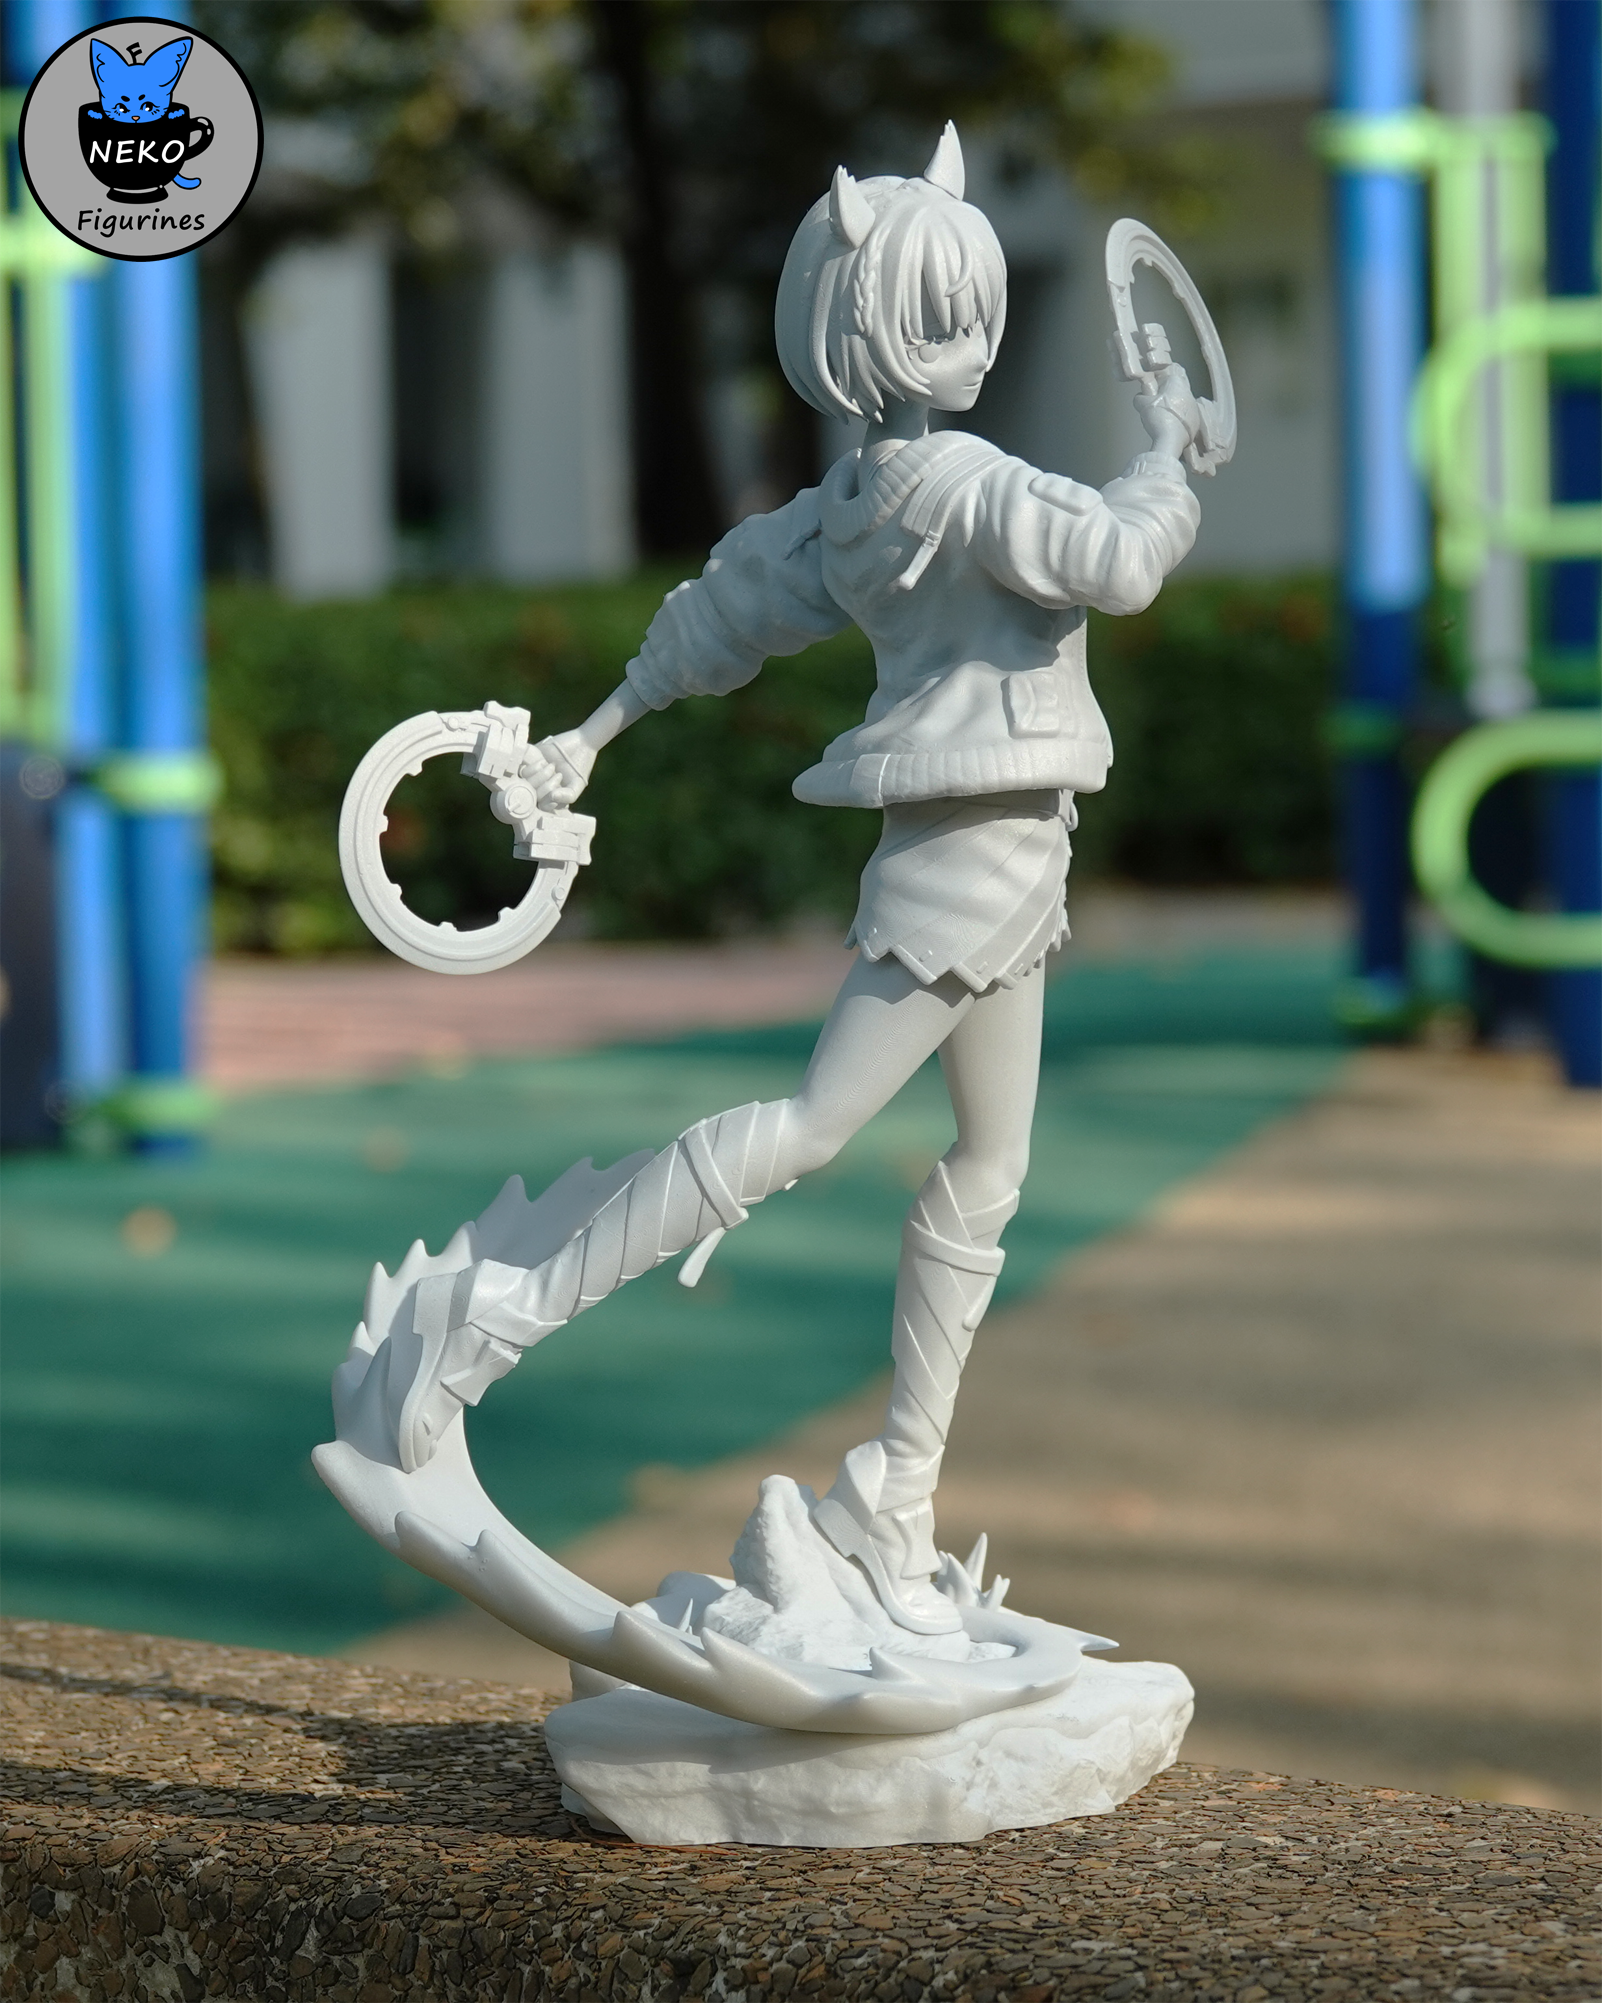 Mio - Xenoblade 3 Anime and Game Figurine for 3D Printing